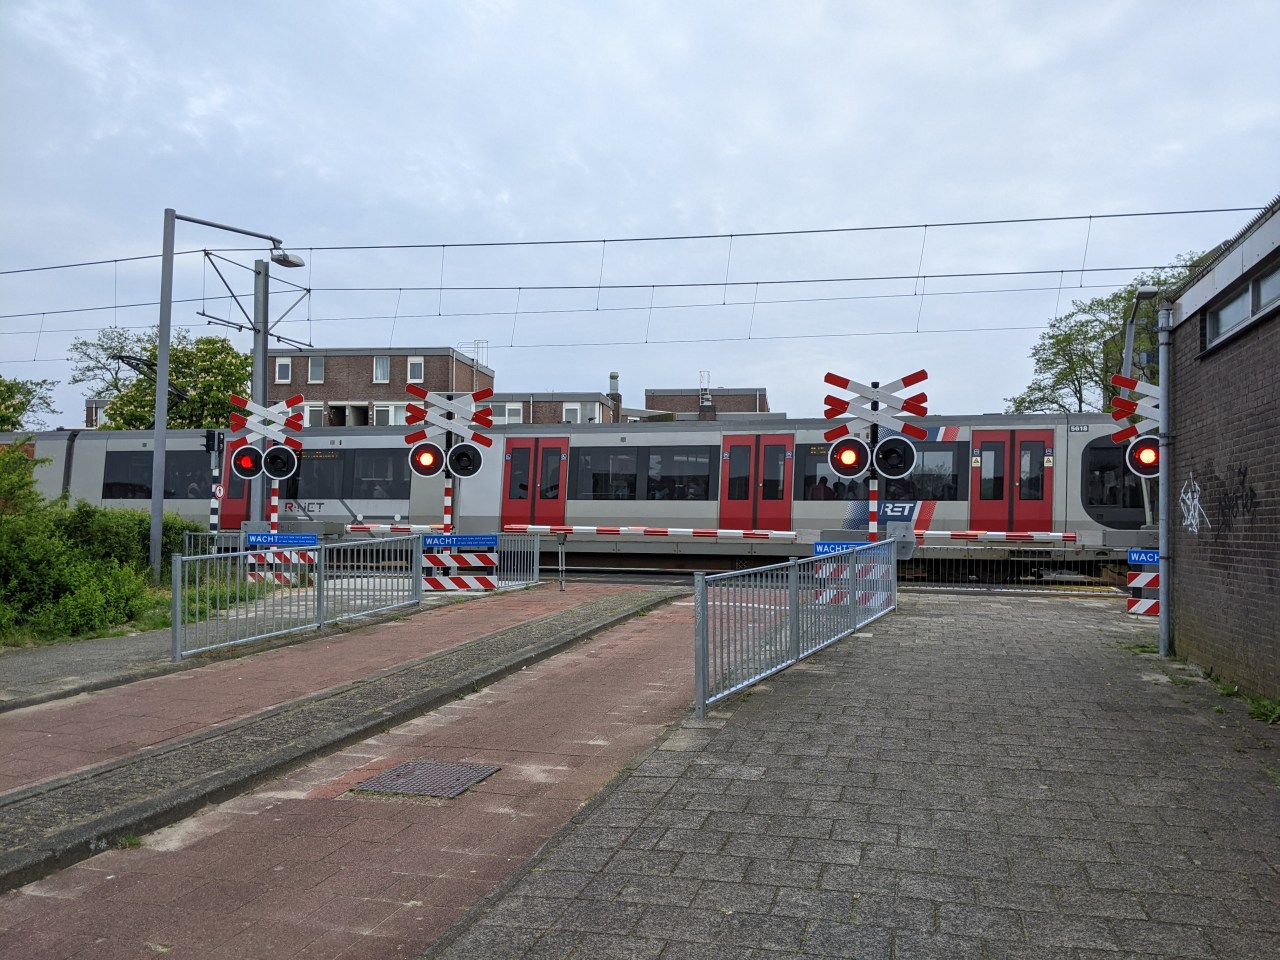 The Rotterdam metro running on the surface, at a bicycle grade-crossing